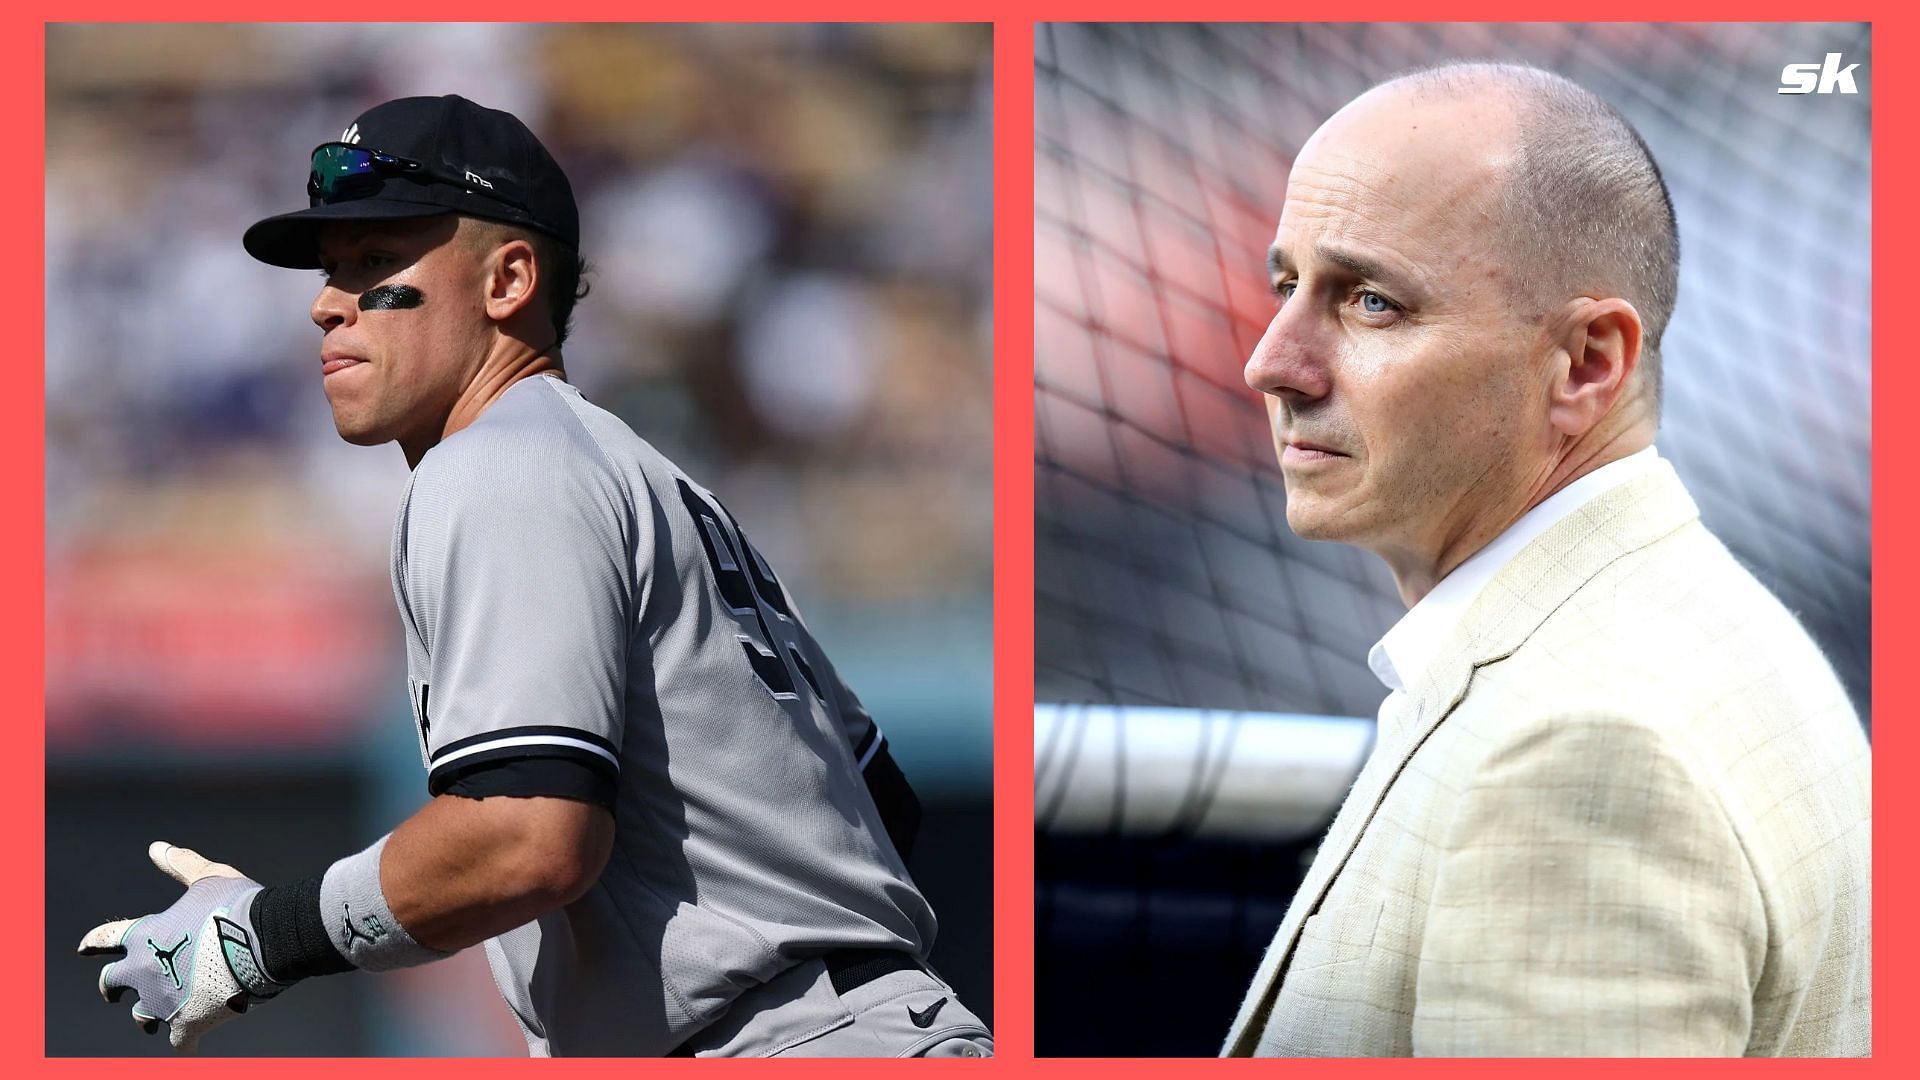 New York Yankees General Manager Brian Cashman spoke about Aaron Judge